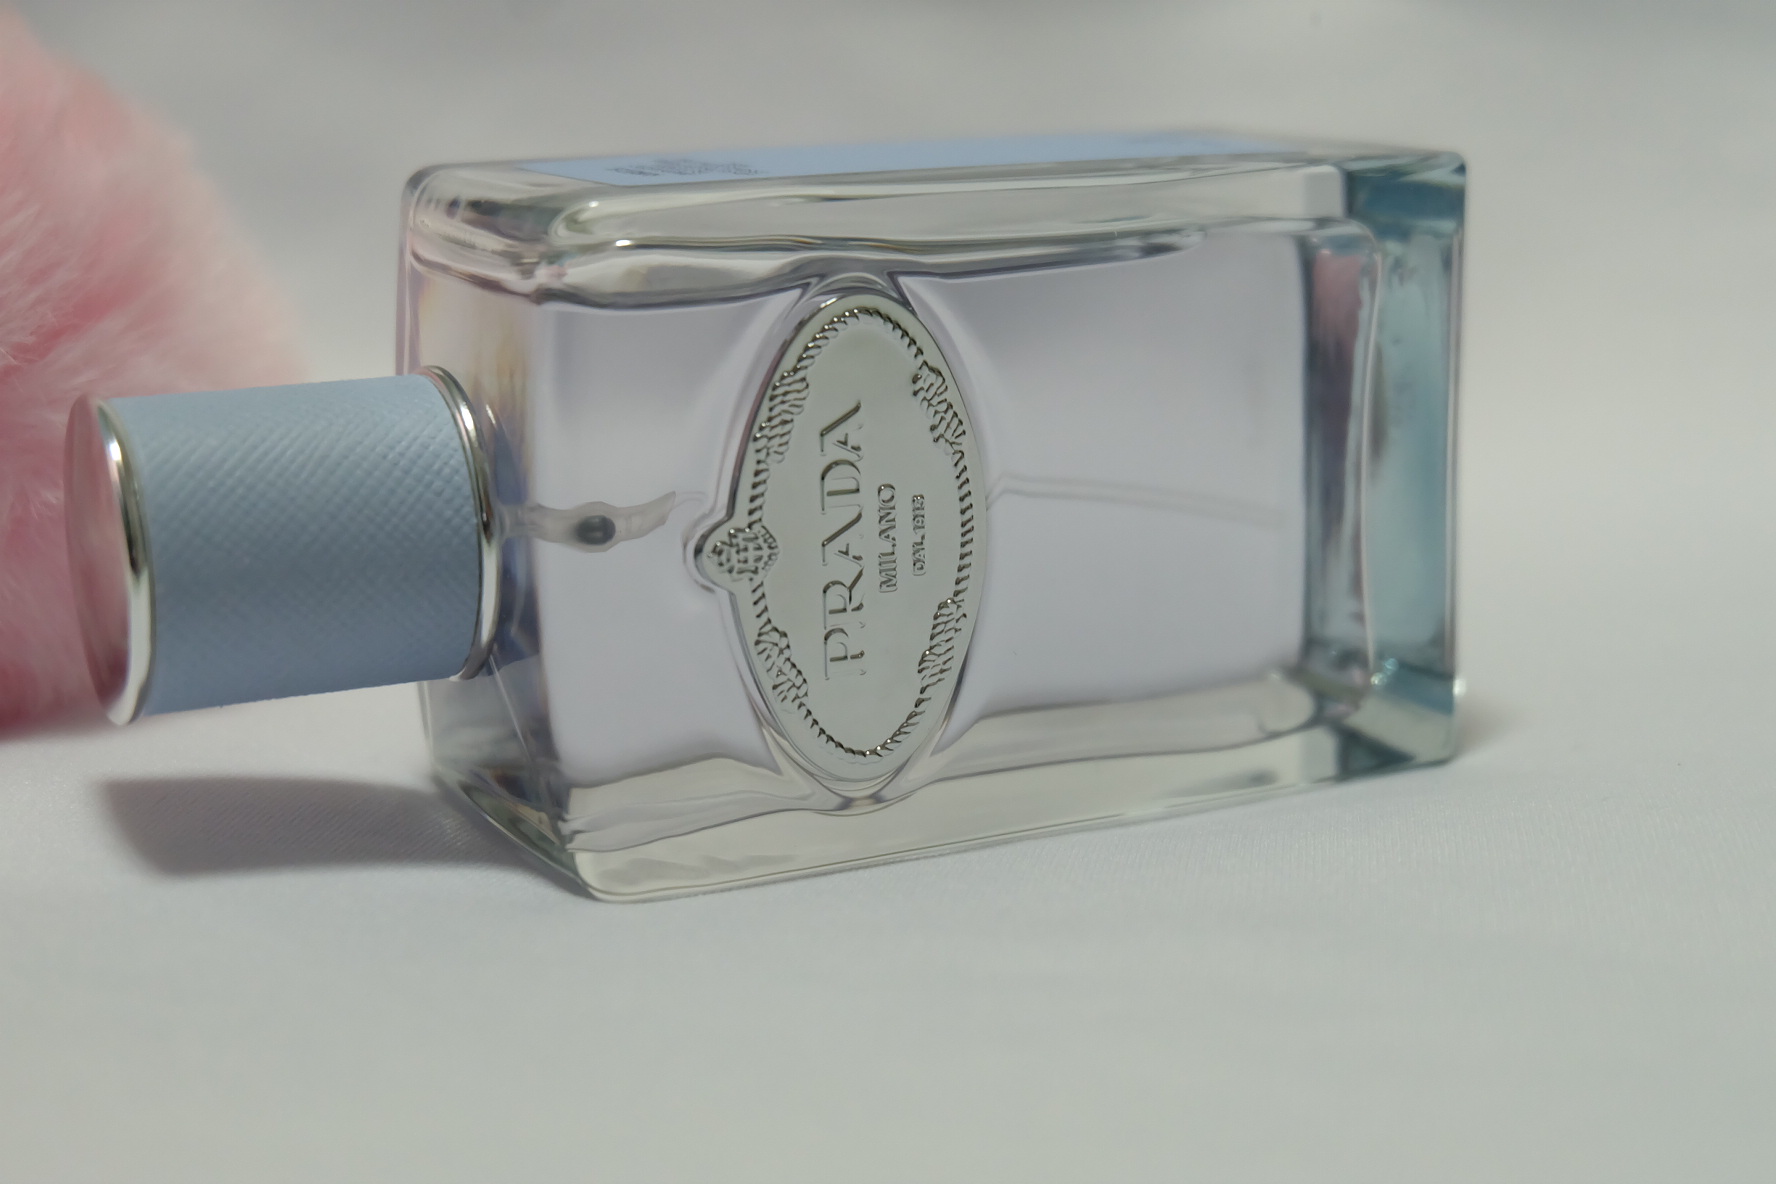 Prada Infusion d'Amande Review | What Heaven Smells Like | Choose Happy